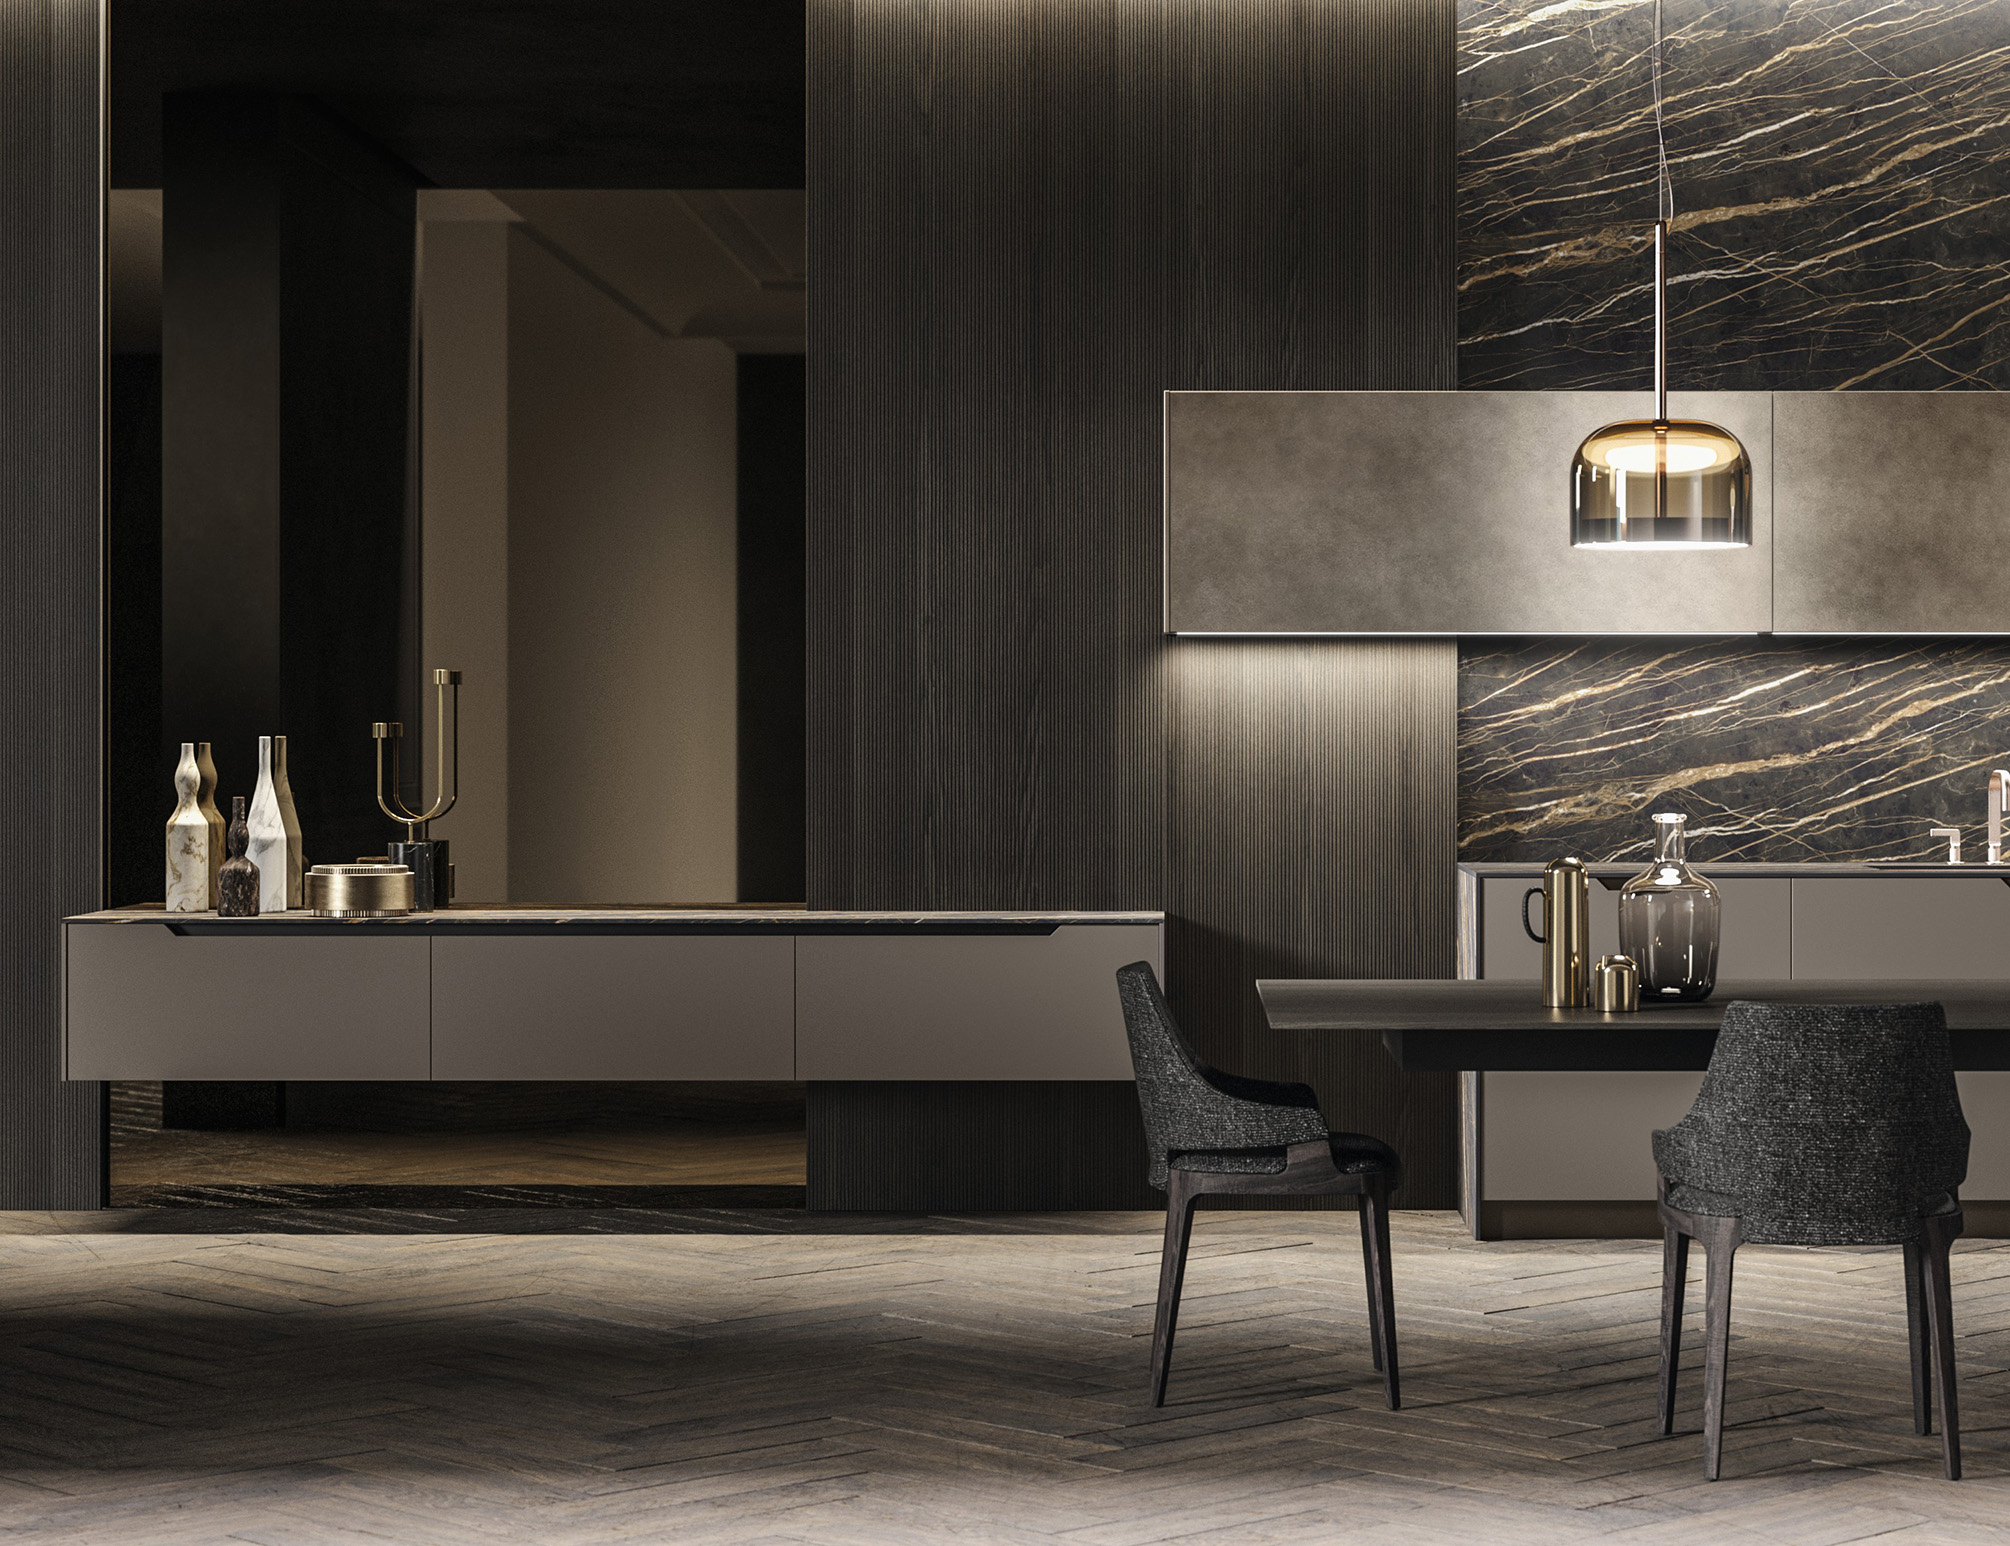 Bespoke Italian Kitchens.Luxury affordable dark italian kitchen in a vast open space with living and dinning